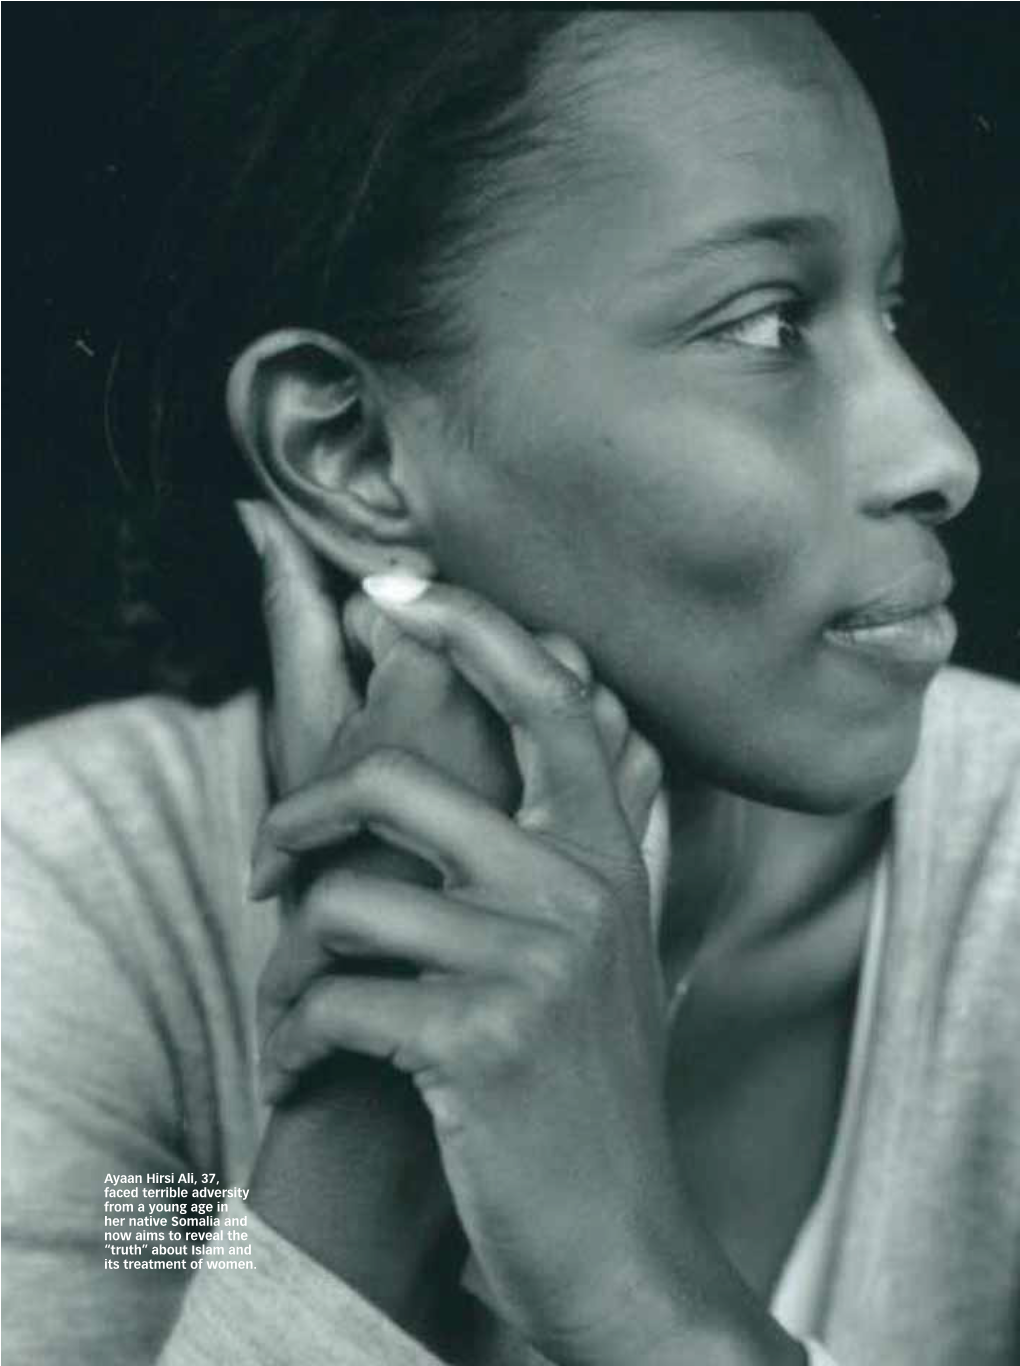 Ayaan Hirsi Ali, 37, Faced Terrible Adversity from a Young Age in Her Native Somalia and Now Aims to Reveal the “Truth” About Islam and Its Treatment of Women